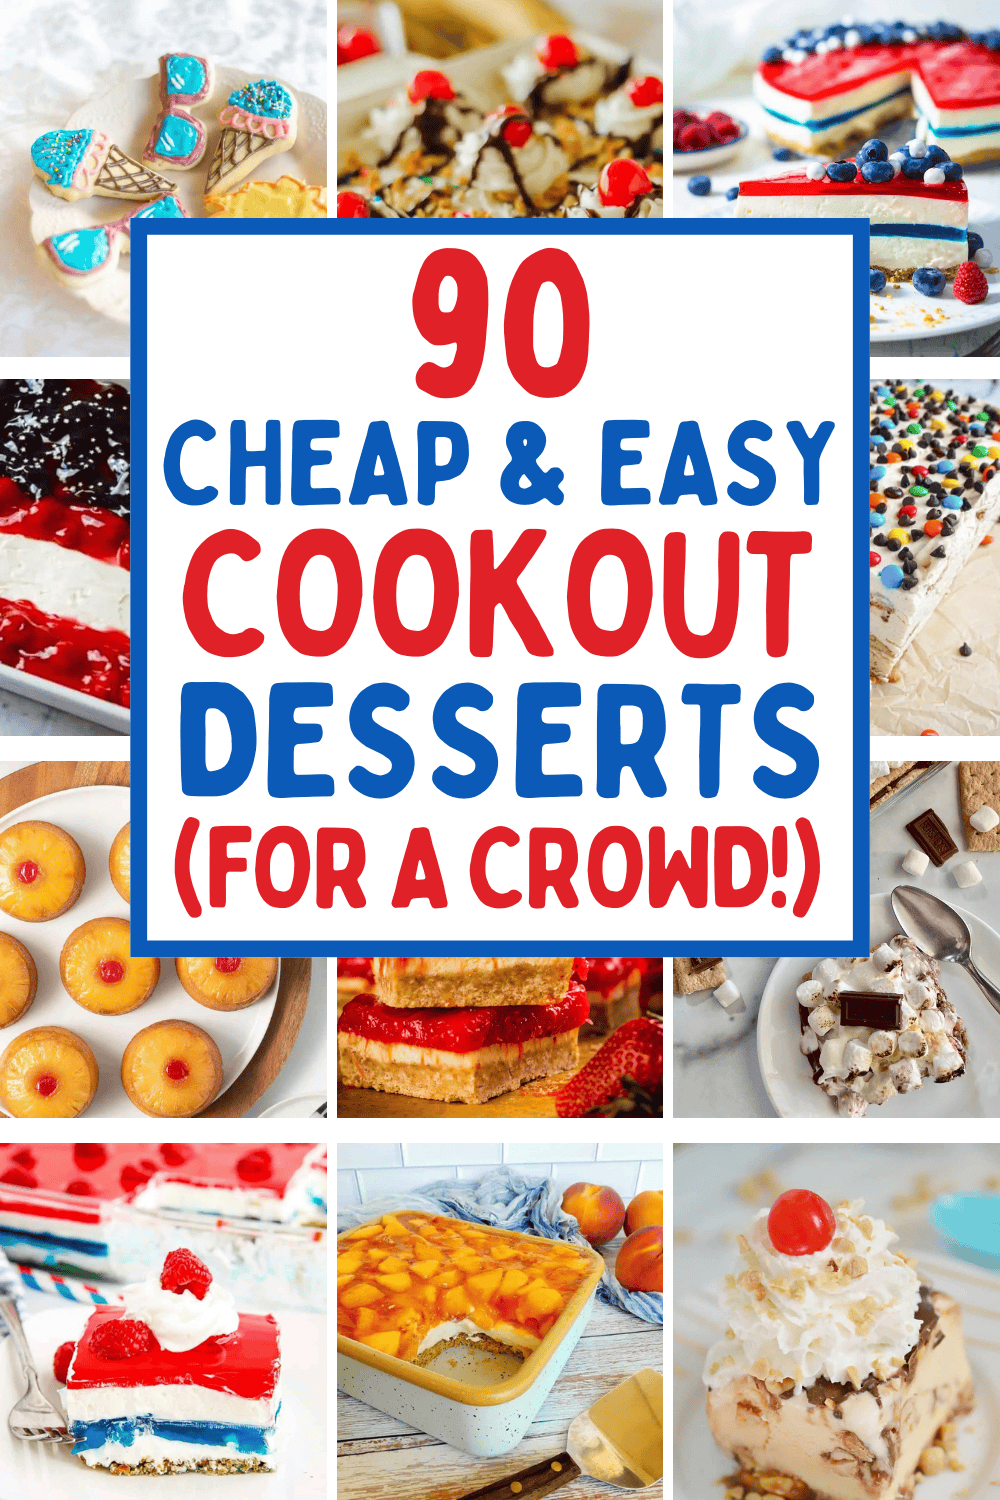 Easy cheap cookout desserts! These summer barbecue desserts make the best backyard cookout desserts for a crowd. BBQ desserts for a crowd easy, cookout desserts for a crowd easy, summer desserts for bbq party, desserts for outdoor summer party, easy desserts for bbq party, summer cookout dessert recipes, ideas for desserts for bbq party, bbq food ideas for a crowd, make ahead desserts for a crowd, cold desserts summer, summer sweet treats dessert recipes, summer picnic food ideas desserts.